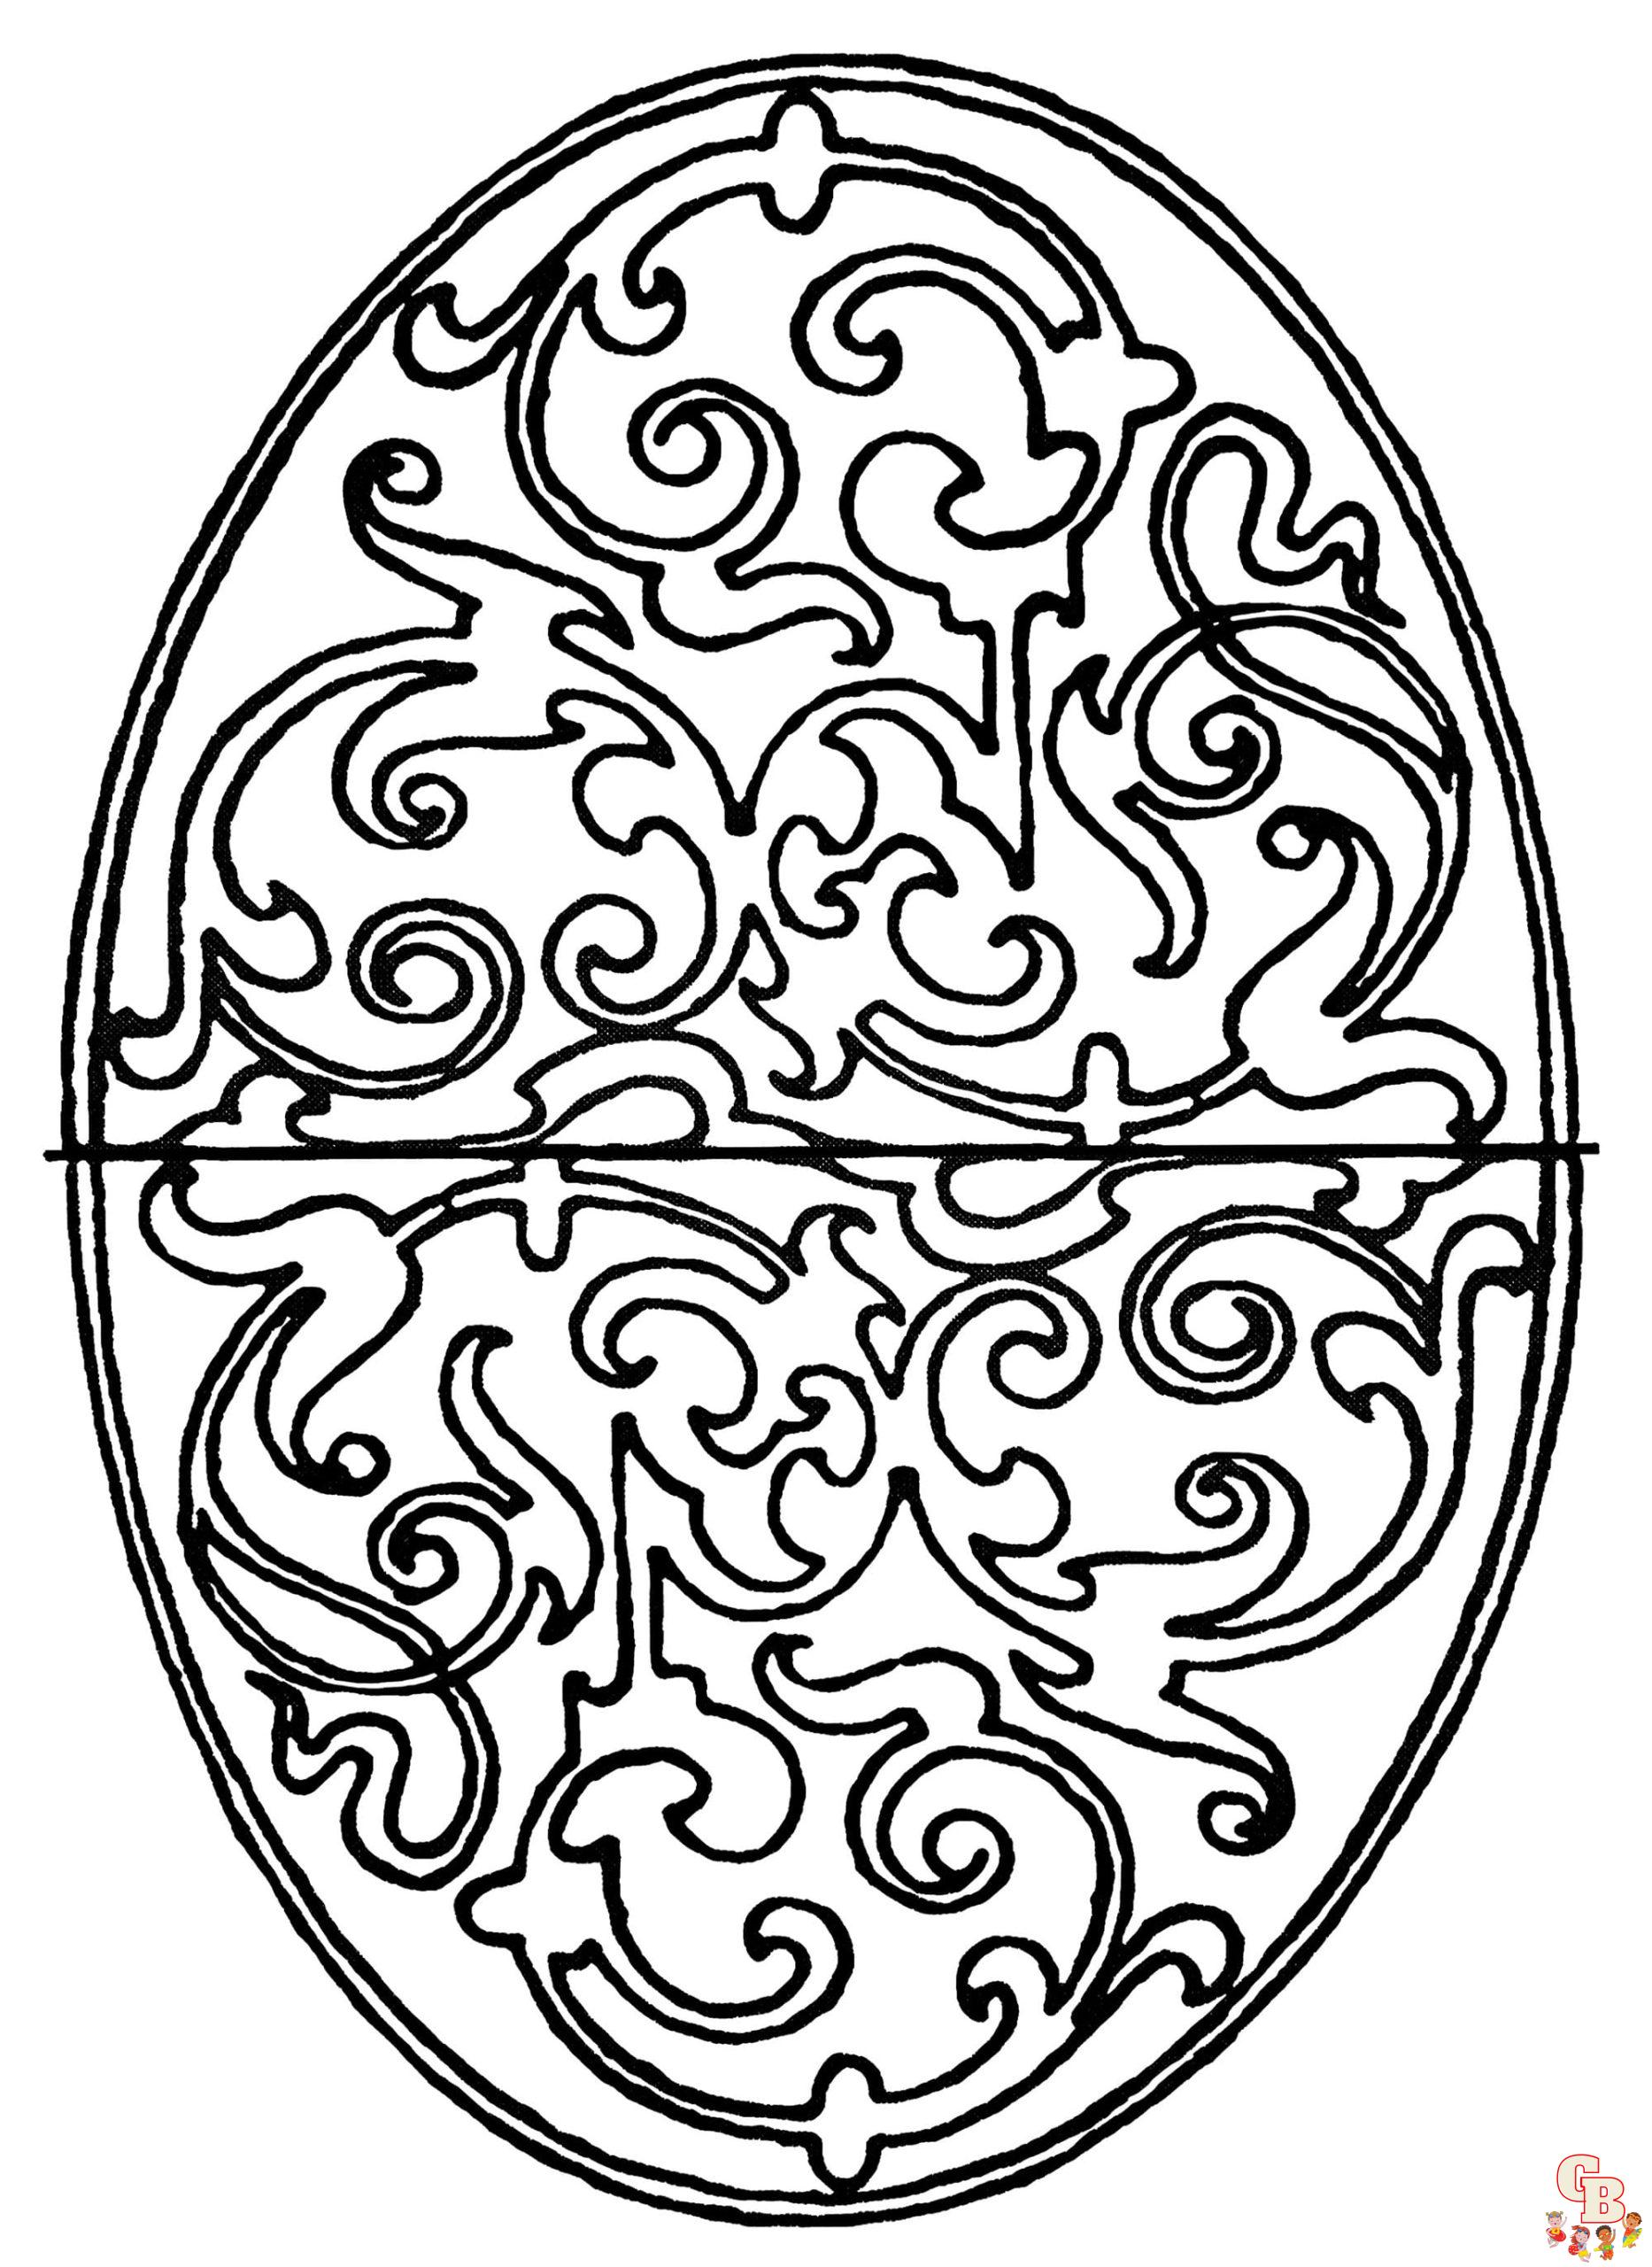 Oval coloring pages printable